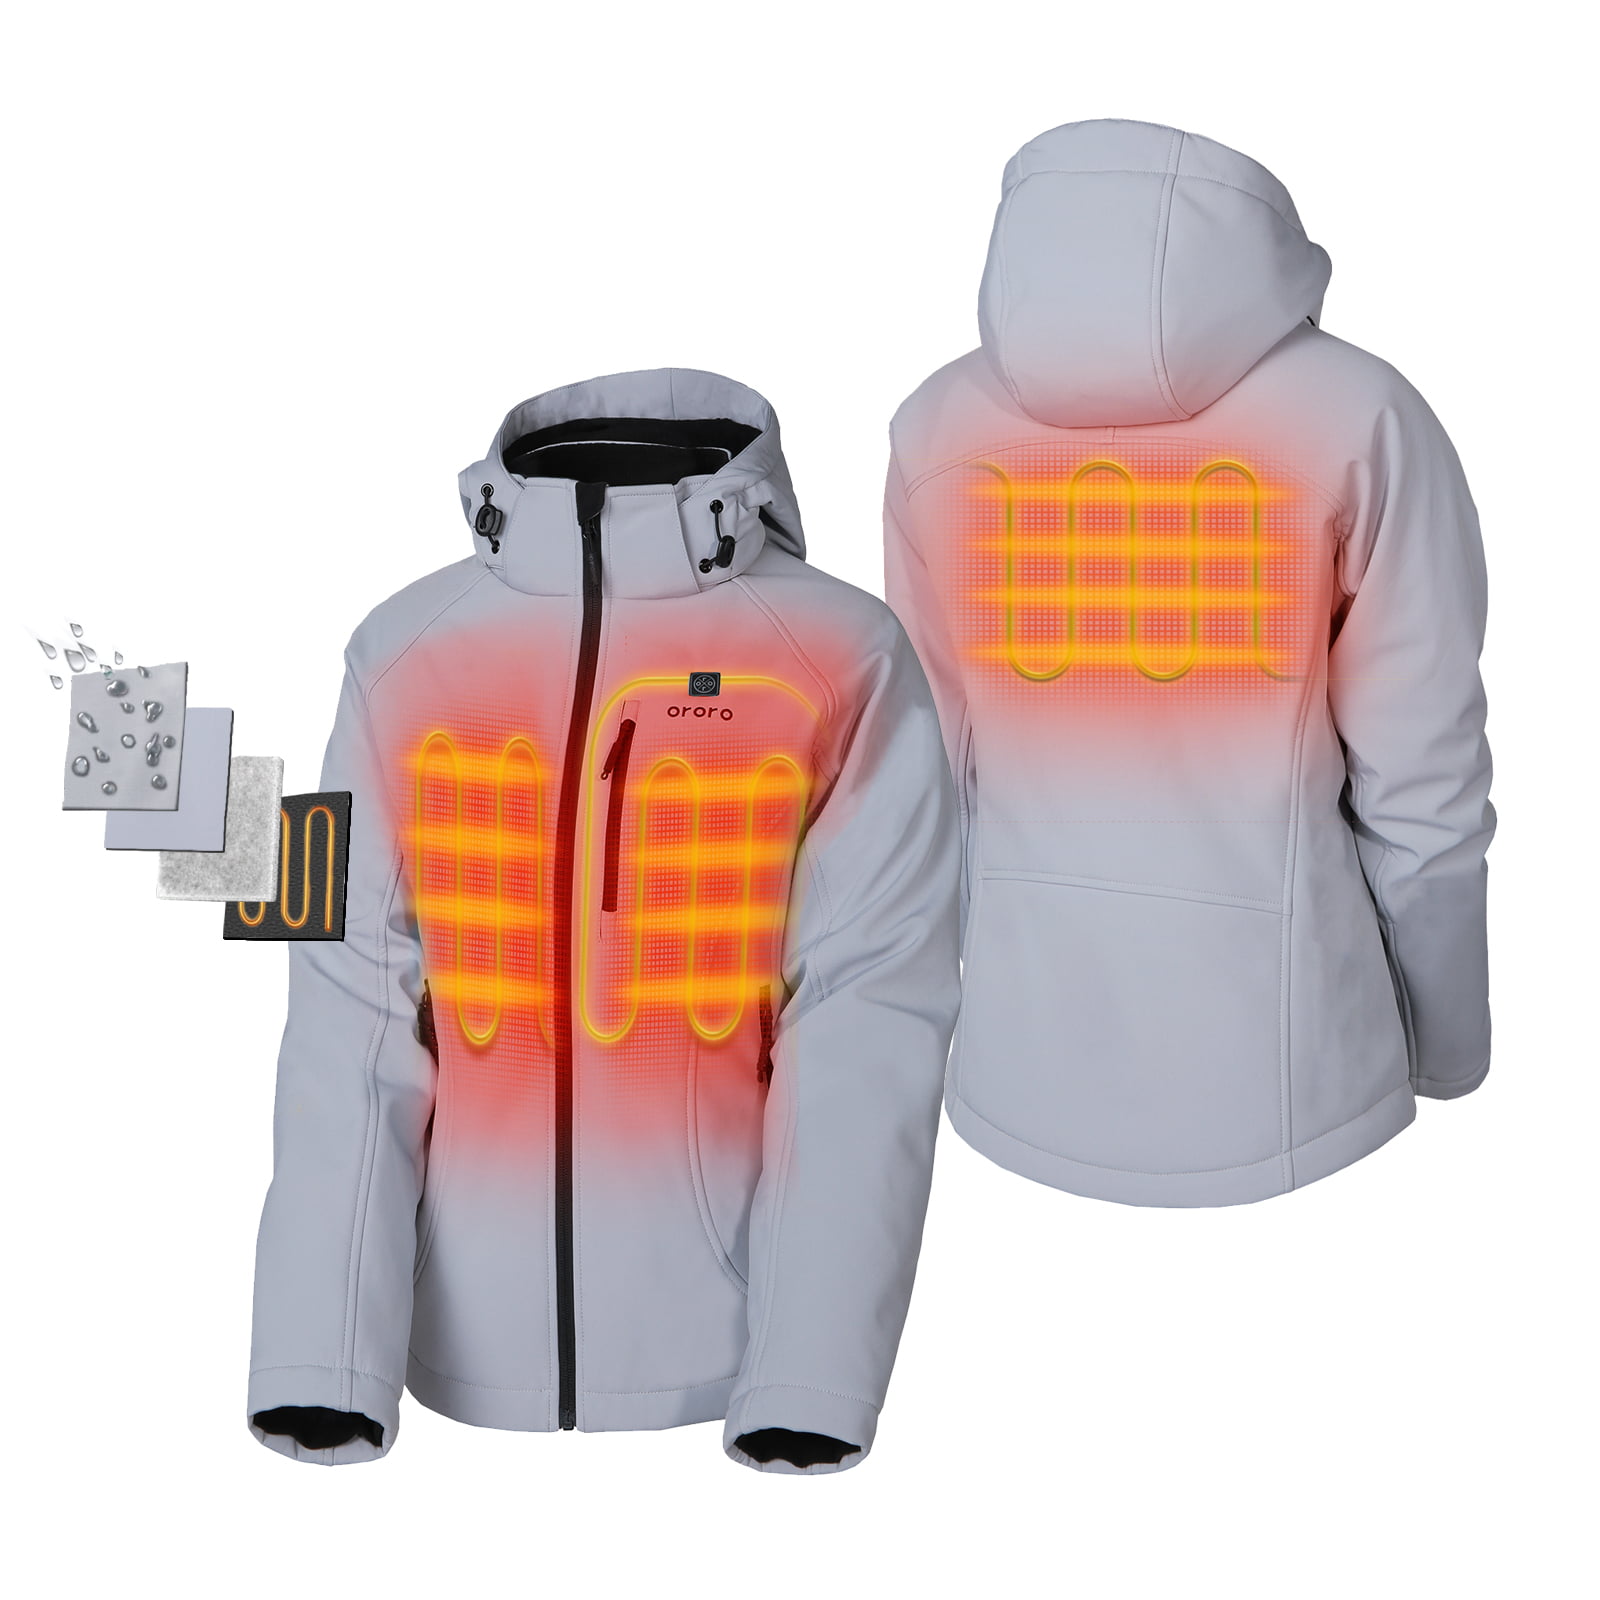 Aunroaa Heated Jacket Womens Slim Fit Coat with 14400 mAh Battery Pack and Comfortable Hood